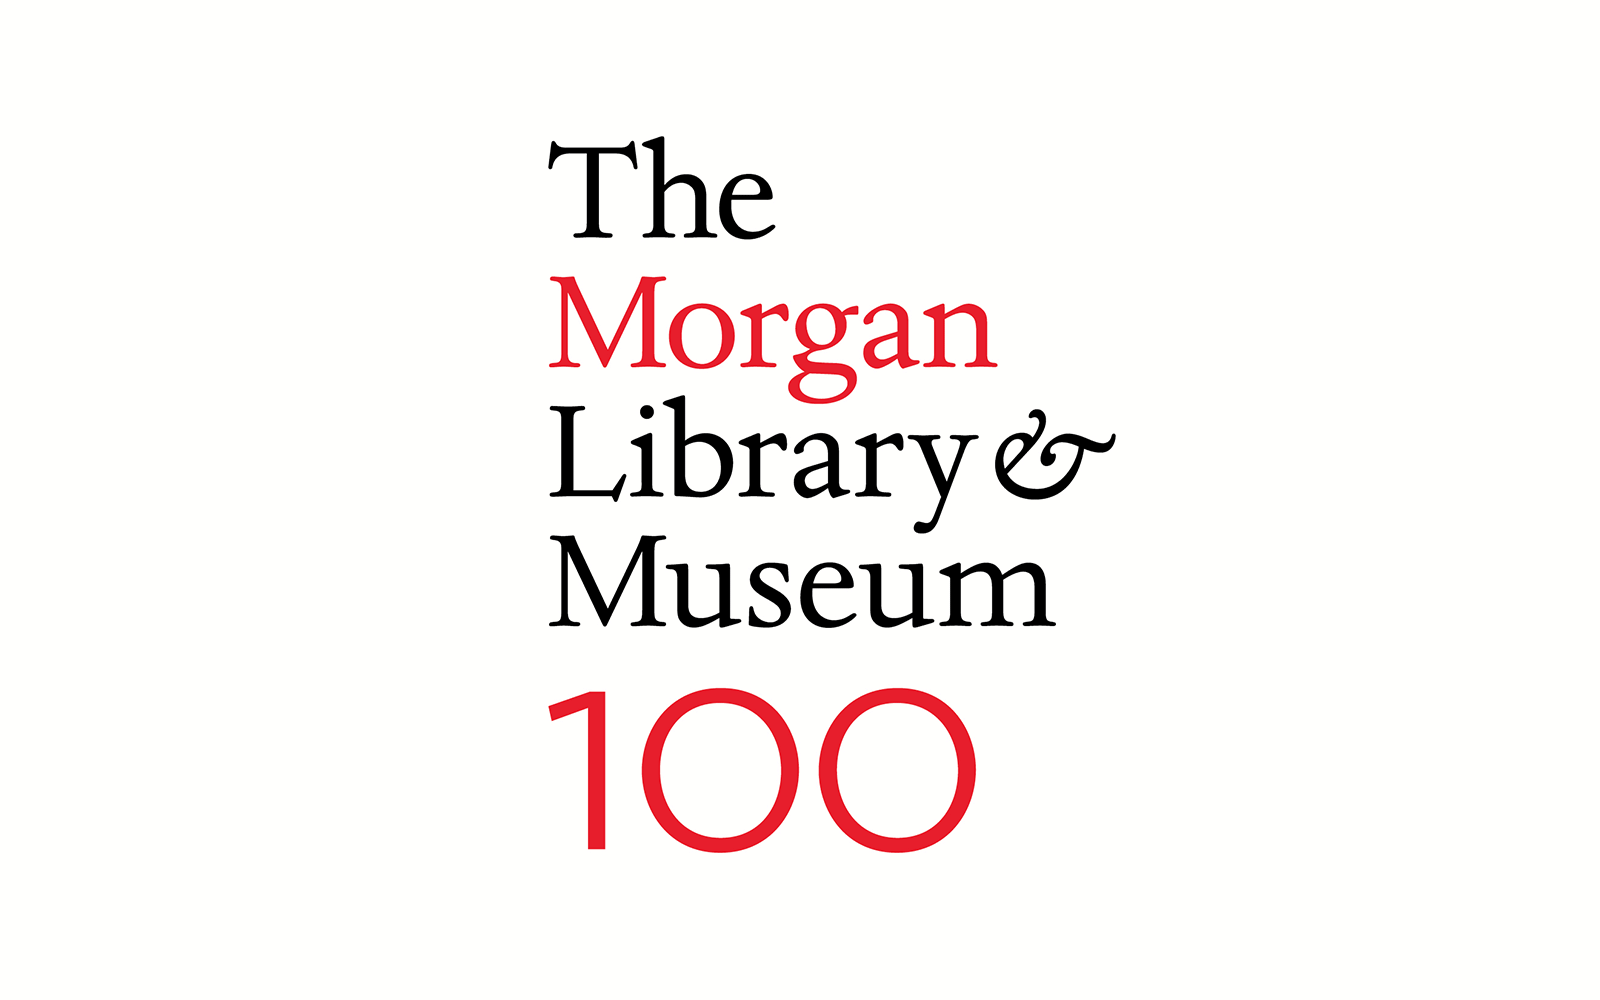 The Morgan Library & Museum, New York, founded by Pierpont Morgan